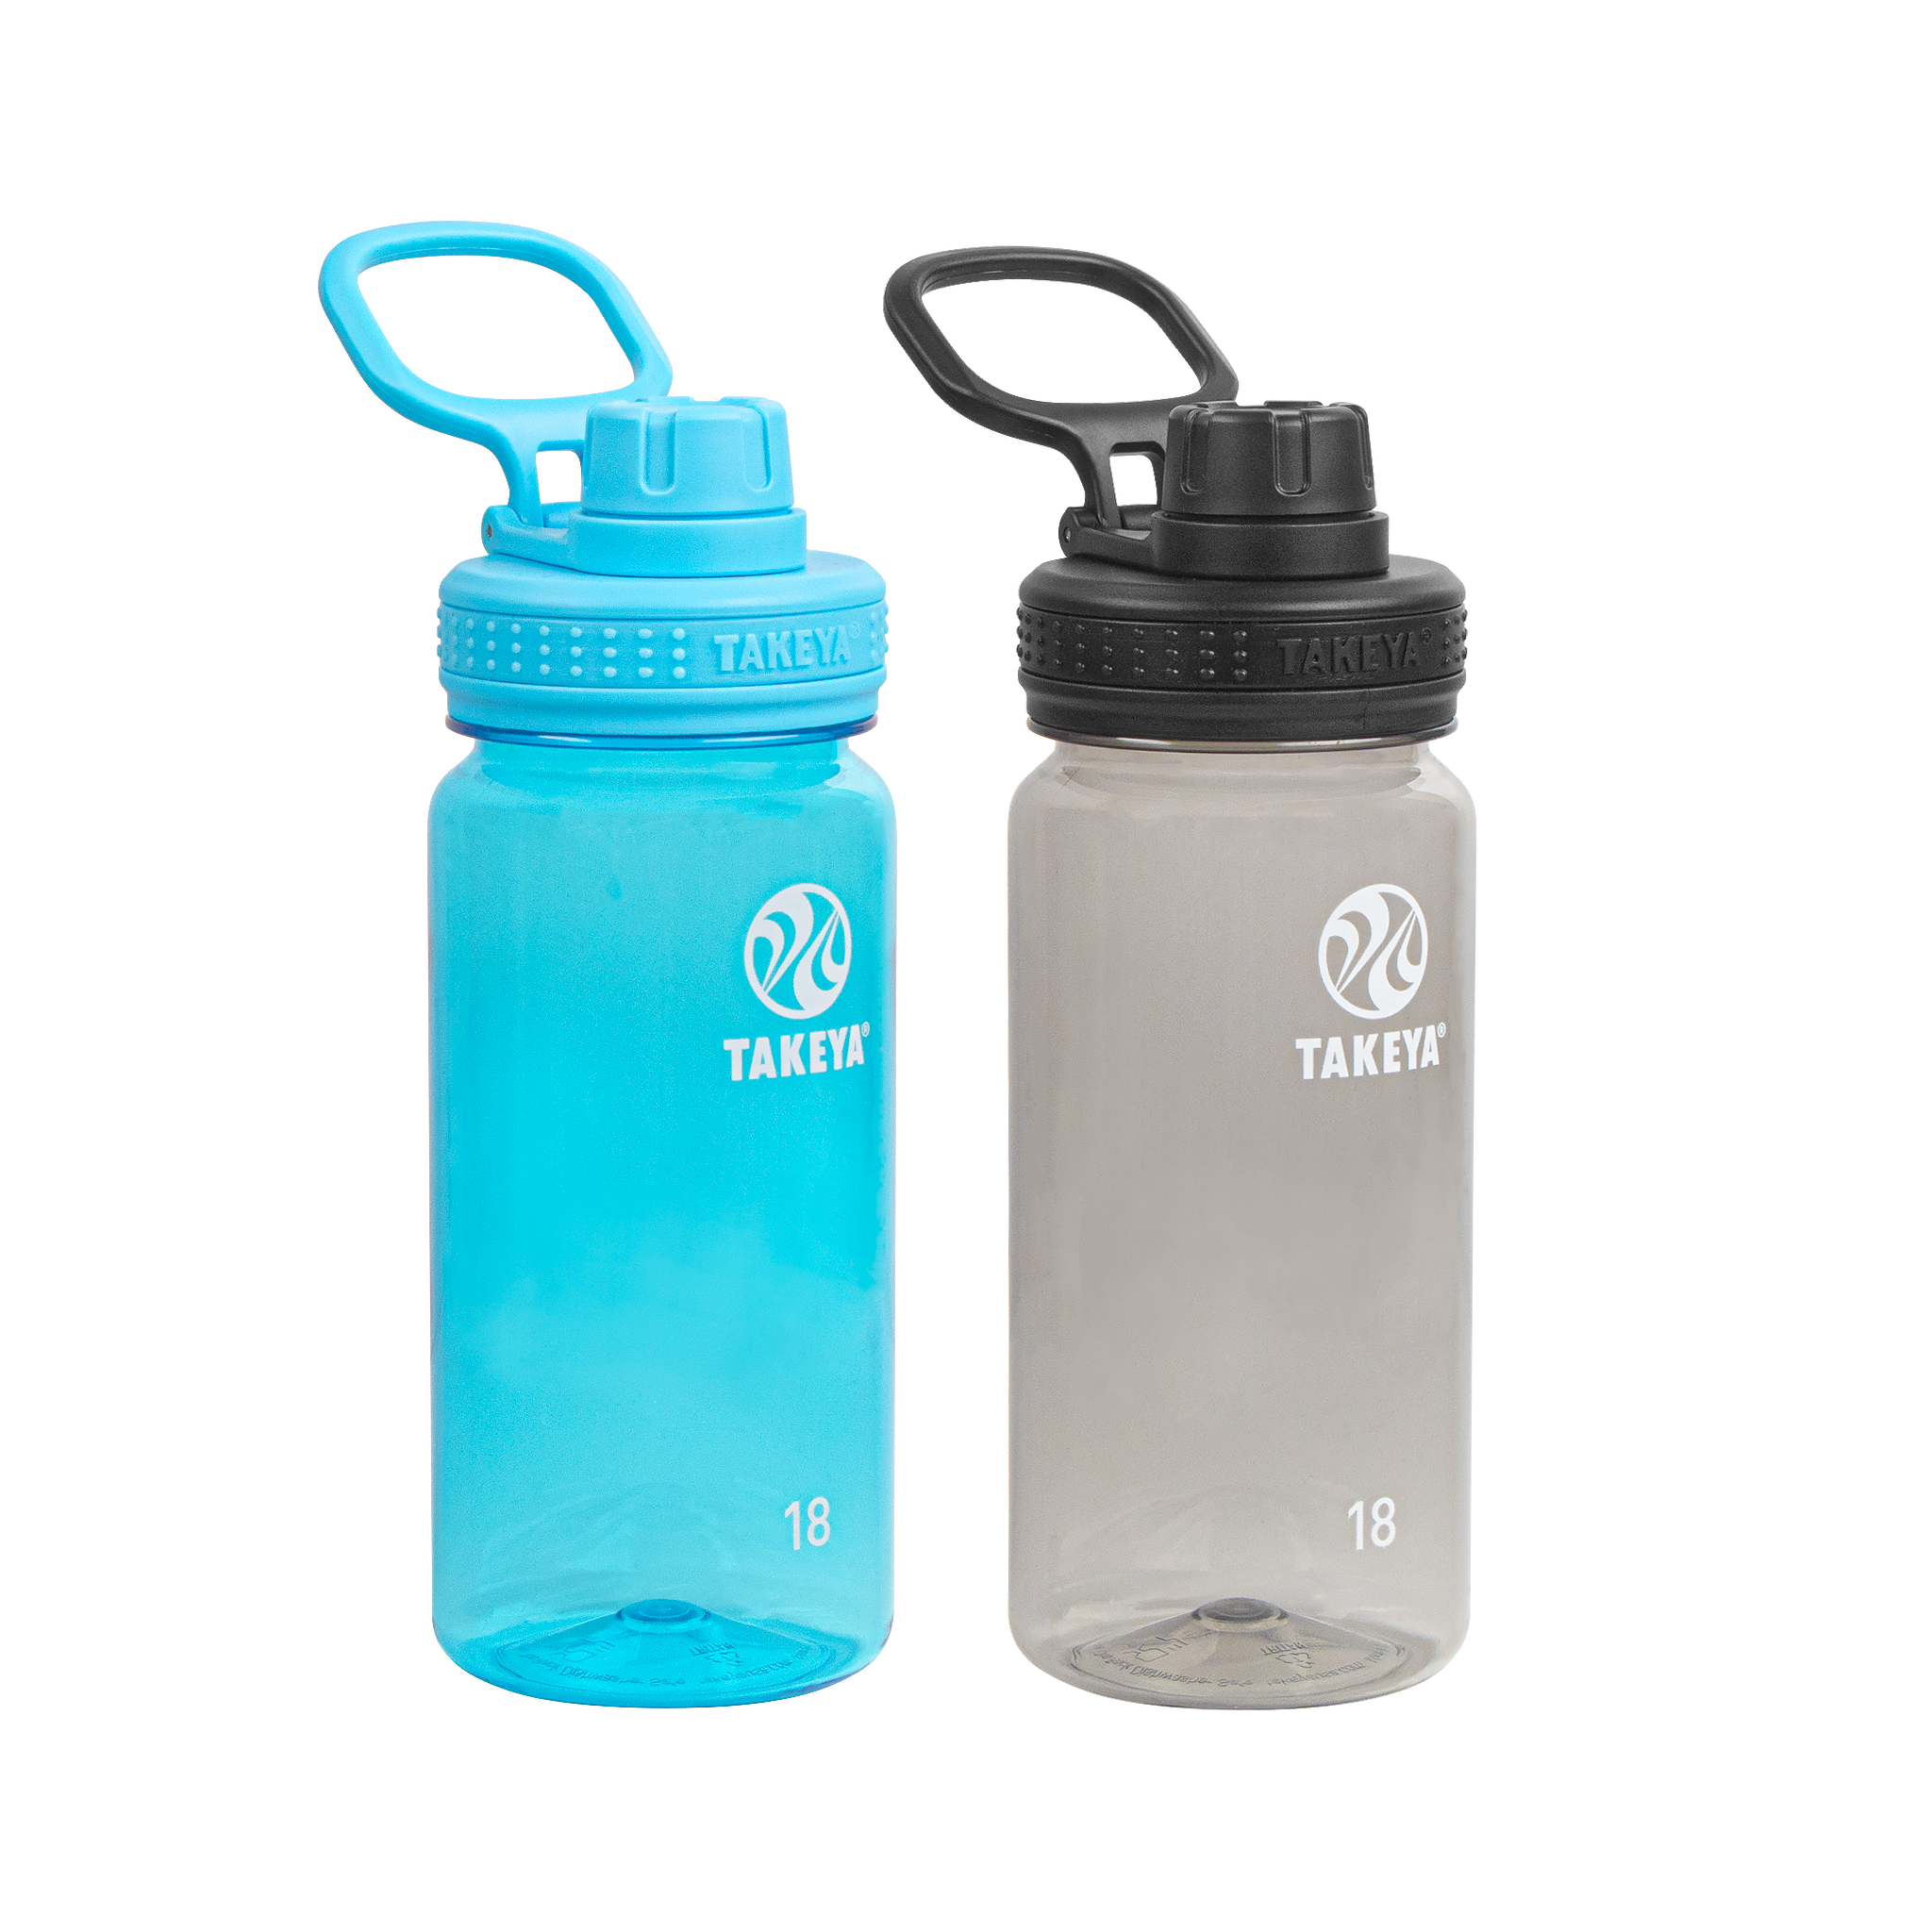 Active Latch Silicone Bottle Blue